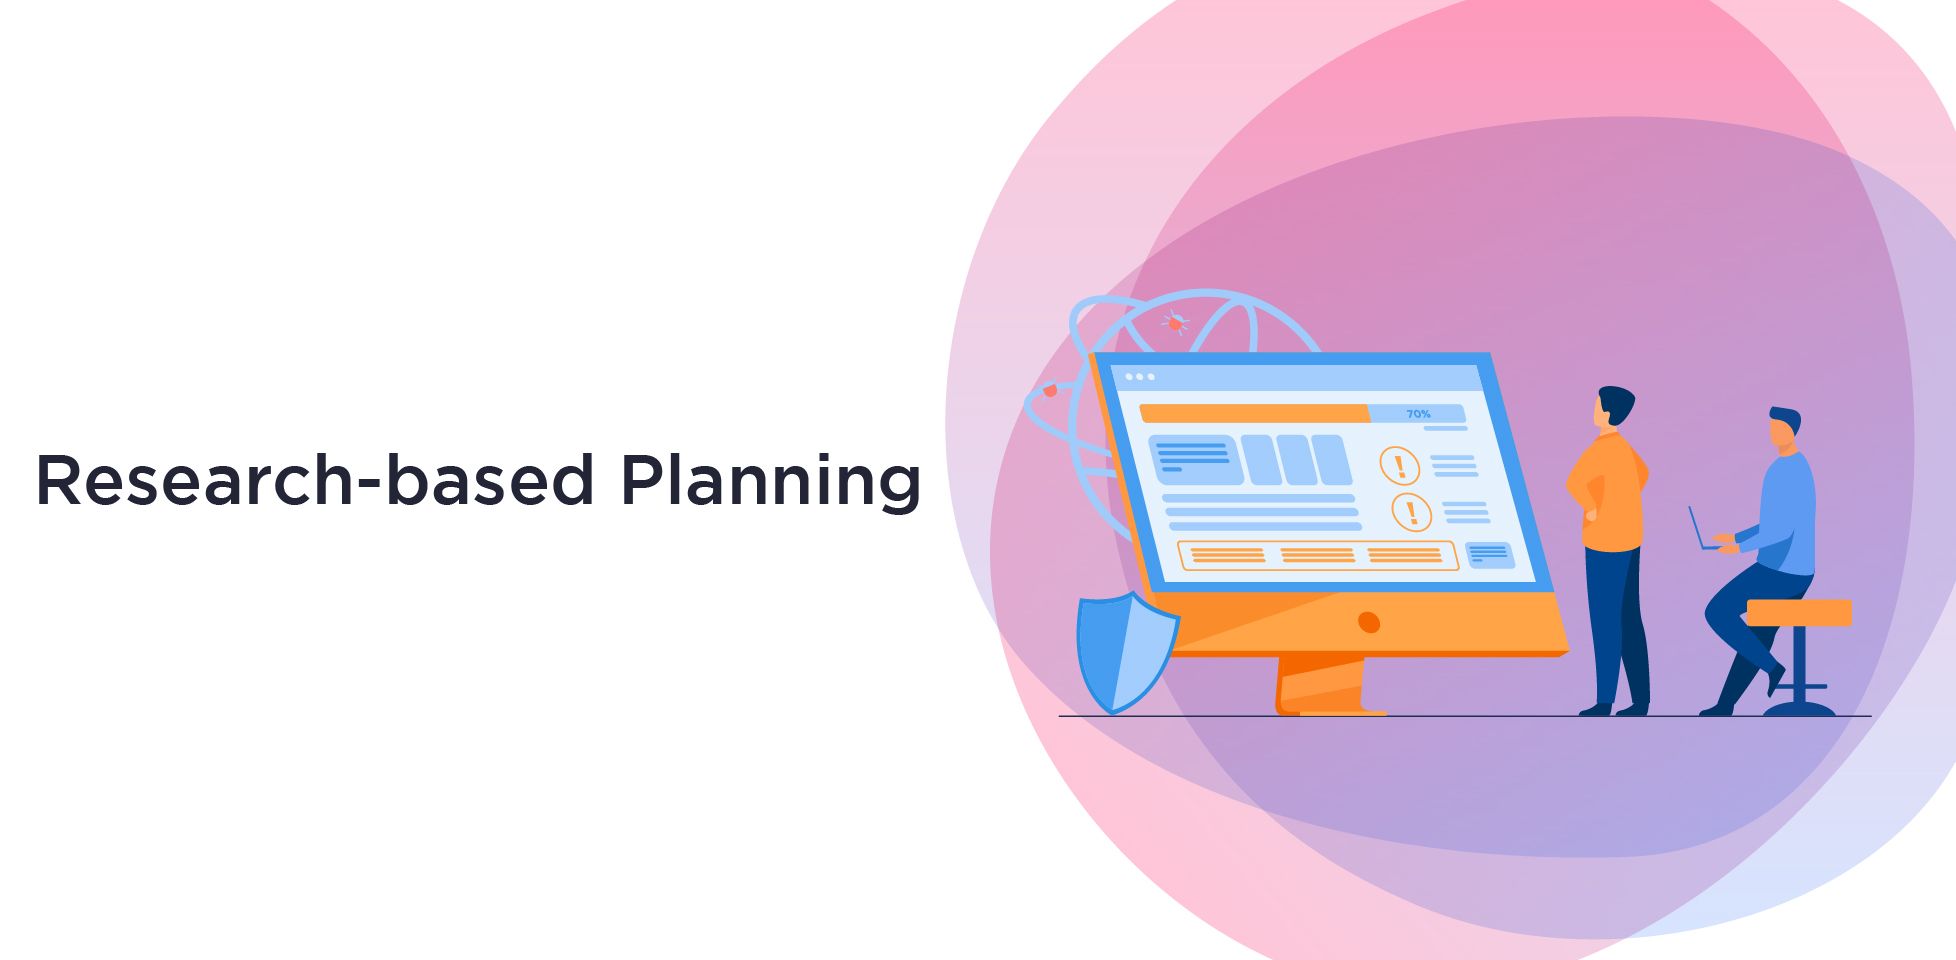 Research-based Planning